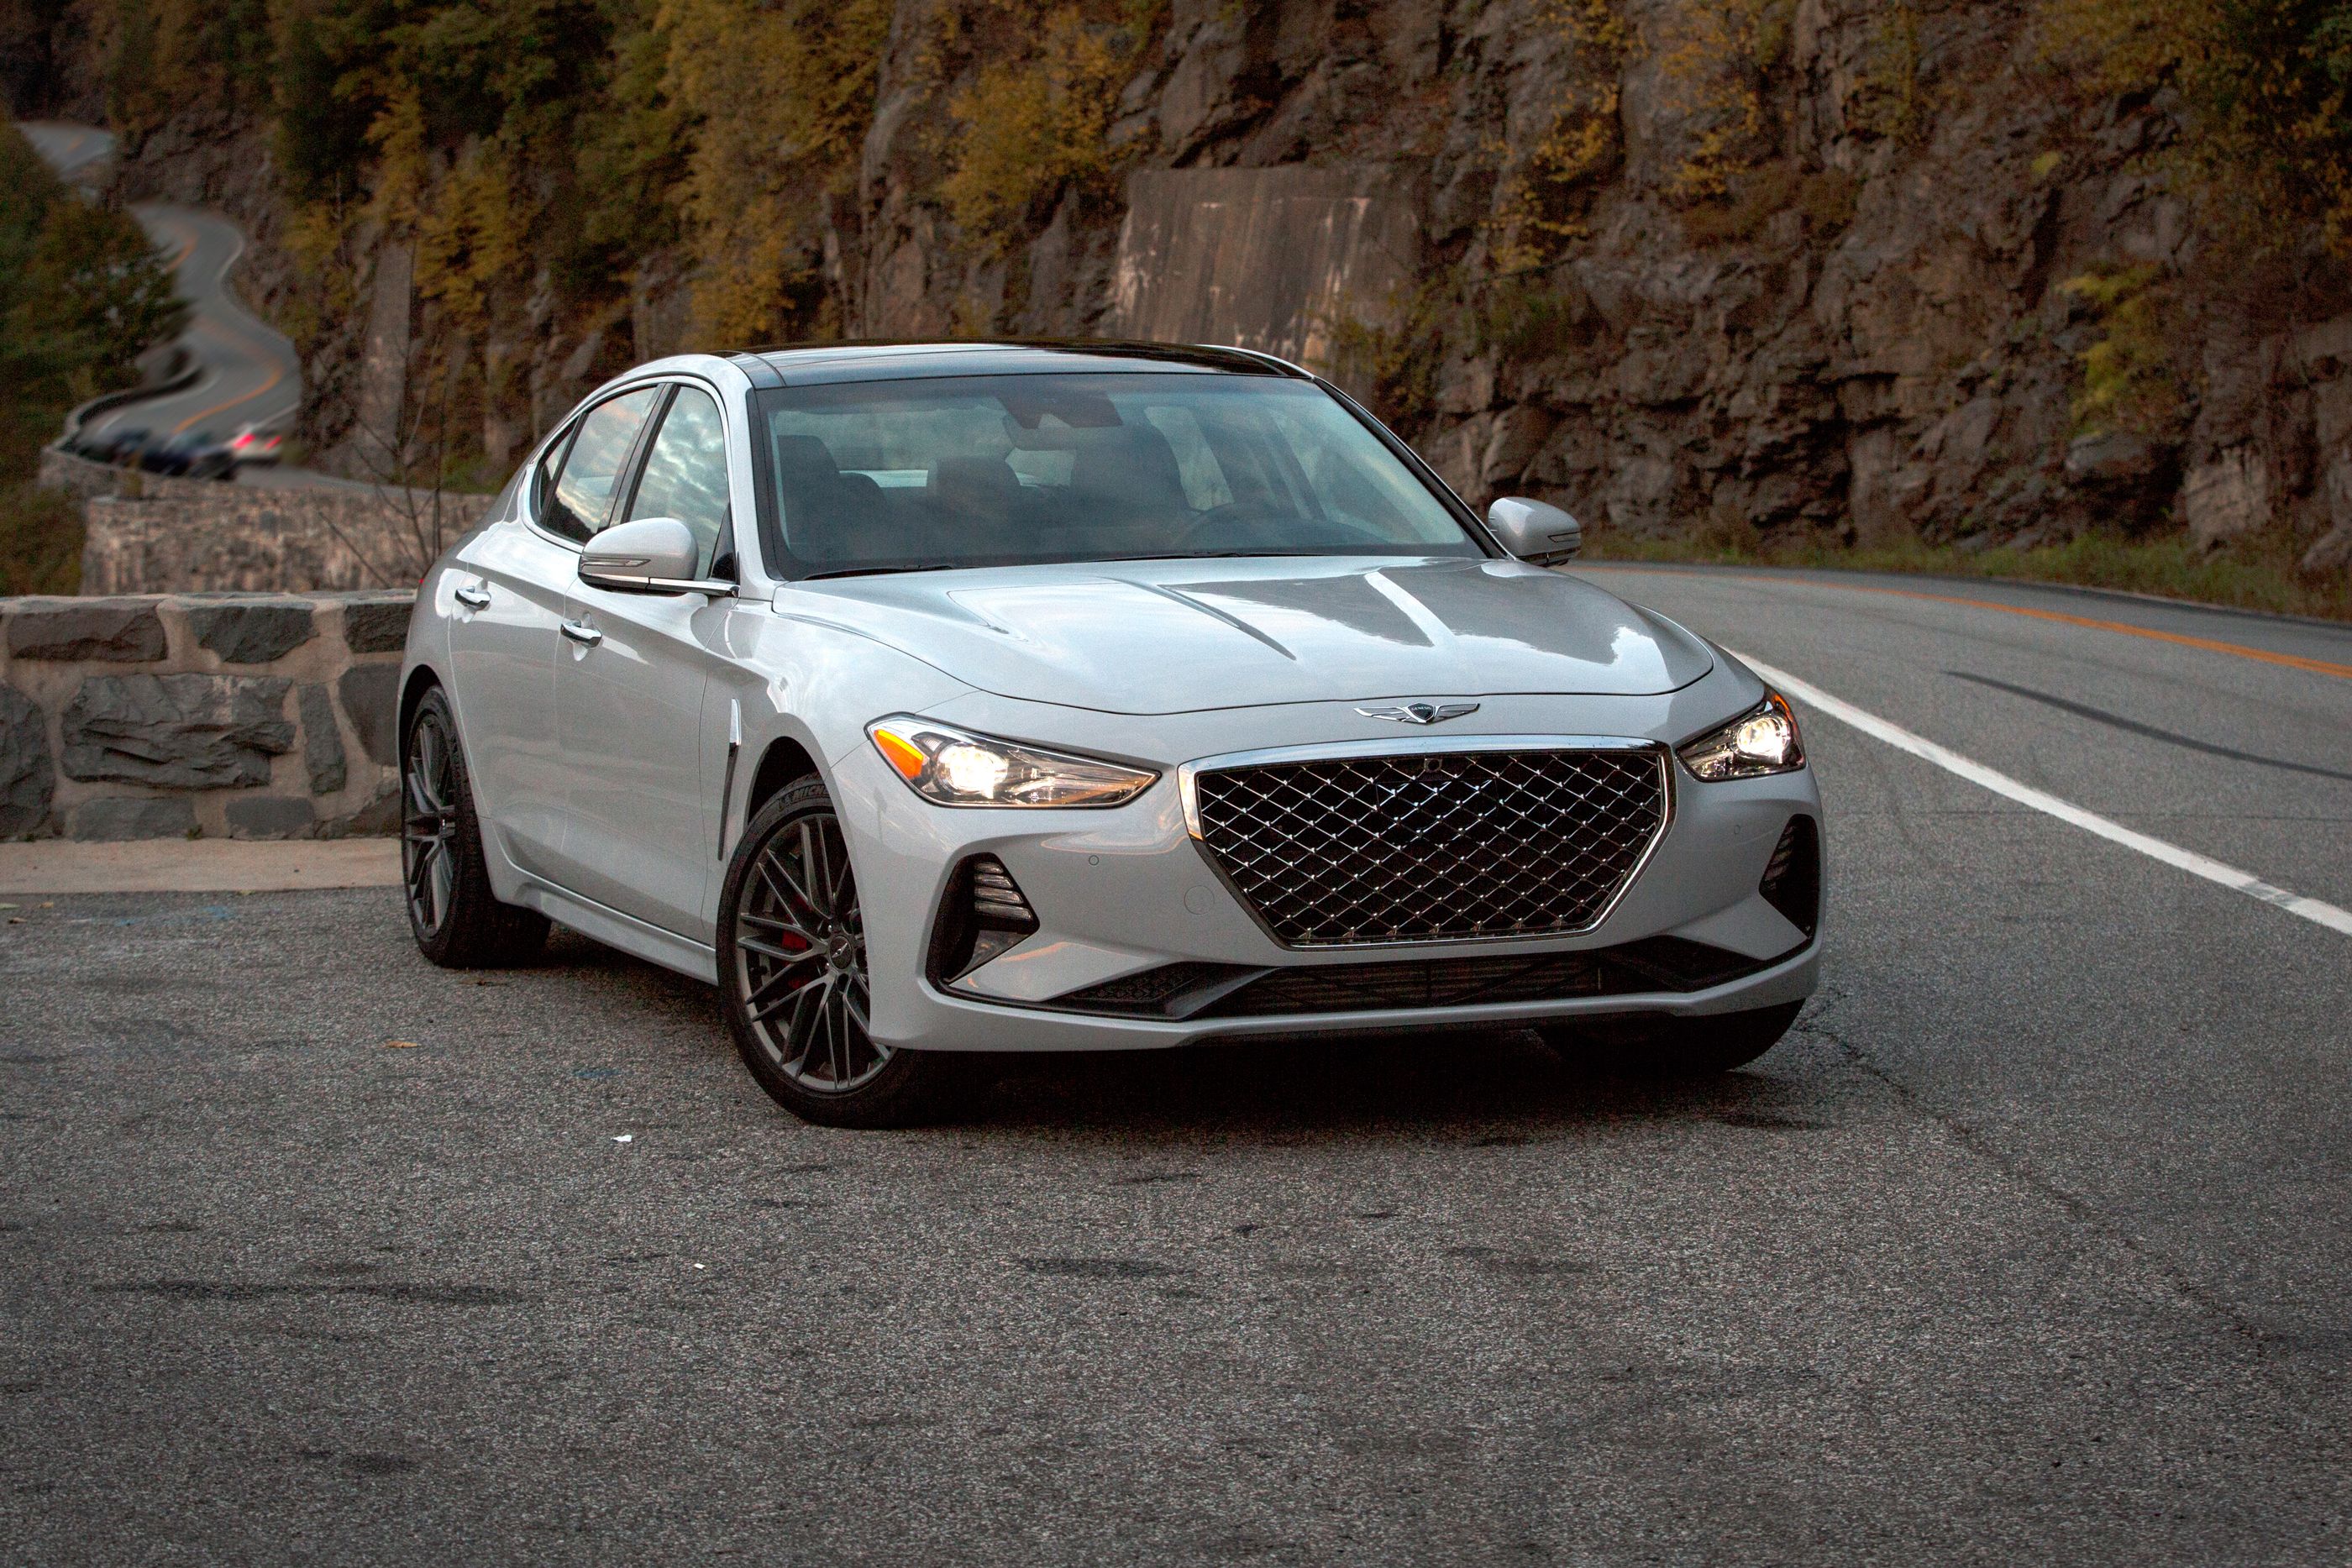 2021 Genesis G70 Review, Pricing, and Specs